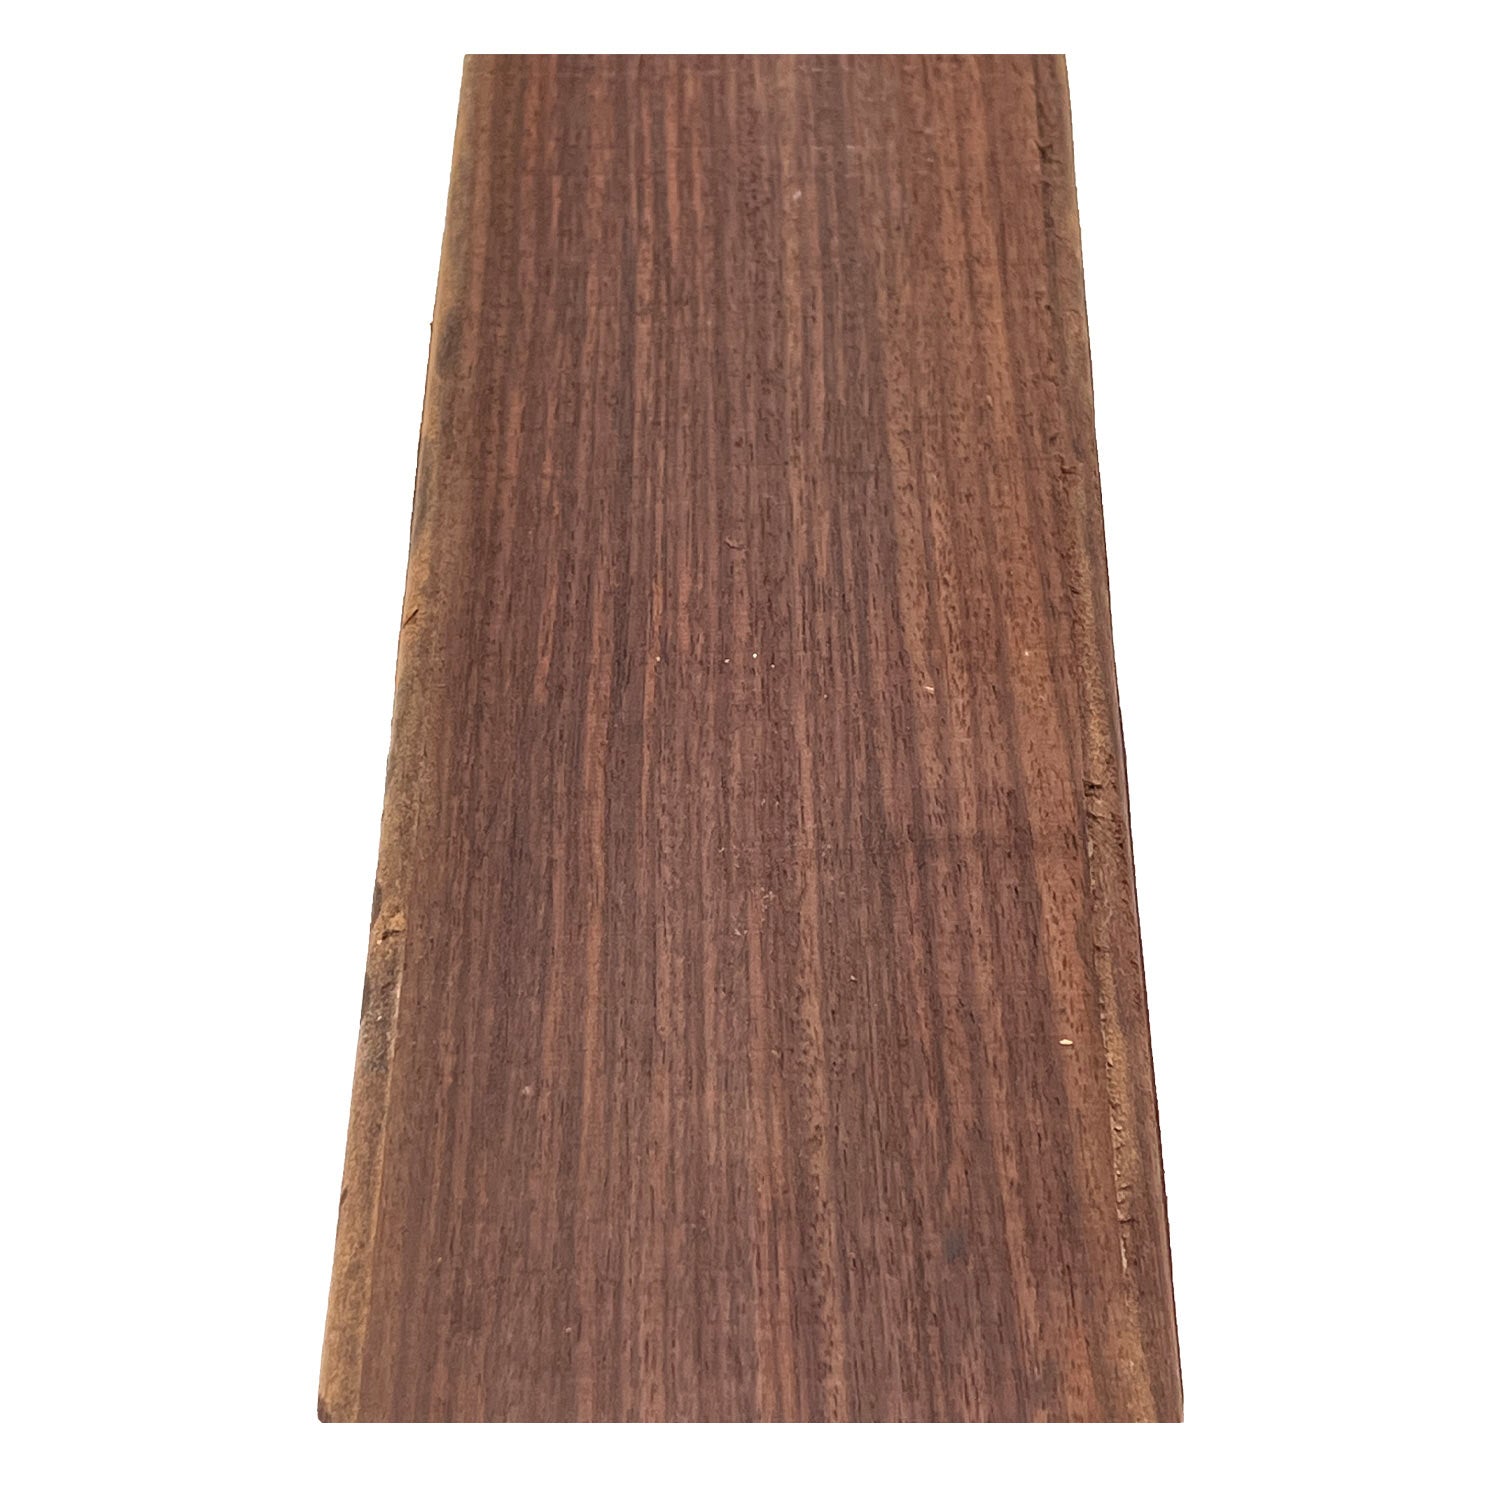 East Indian Rosewood Electrical/ Bass Wood Guitar Neck Blank 31x4x1 1/4  #58